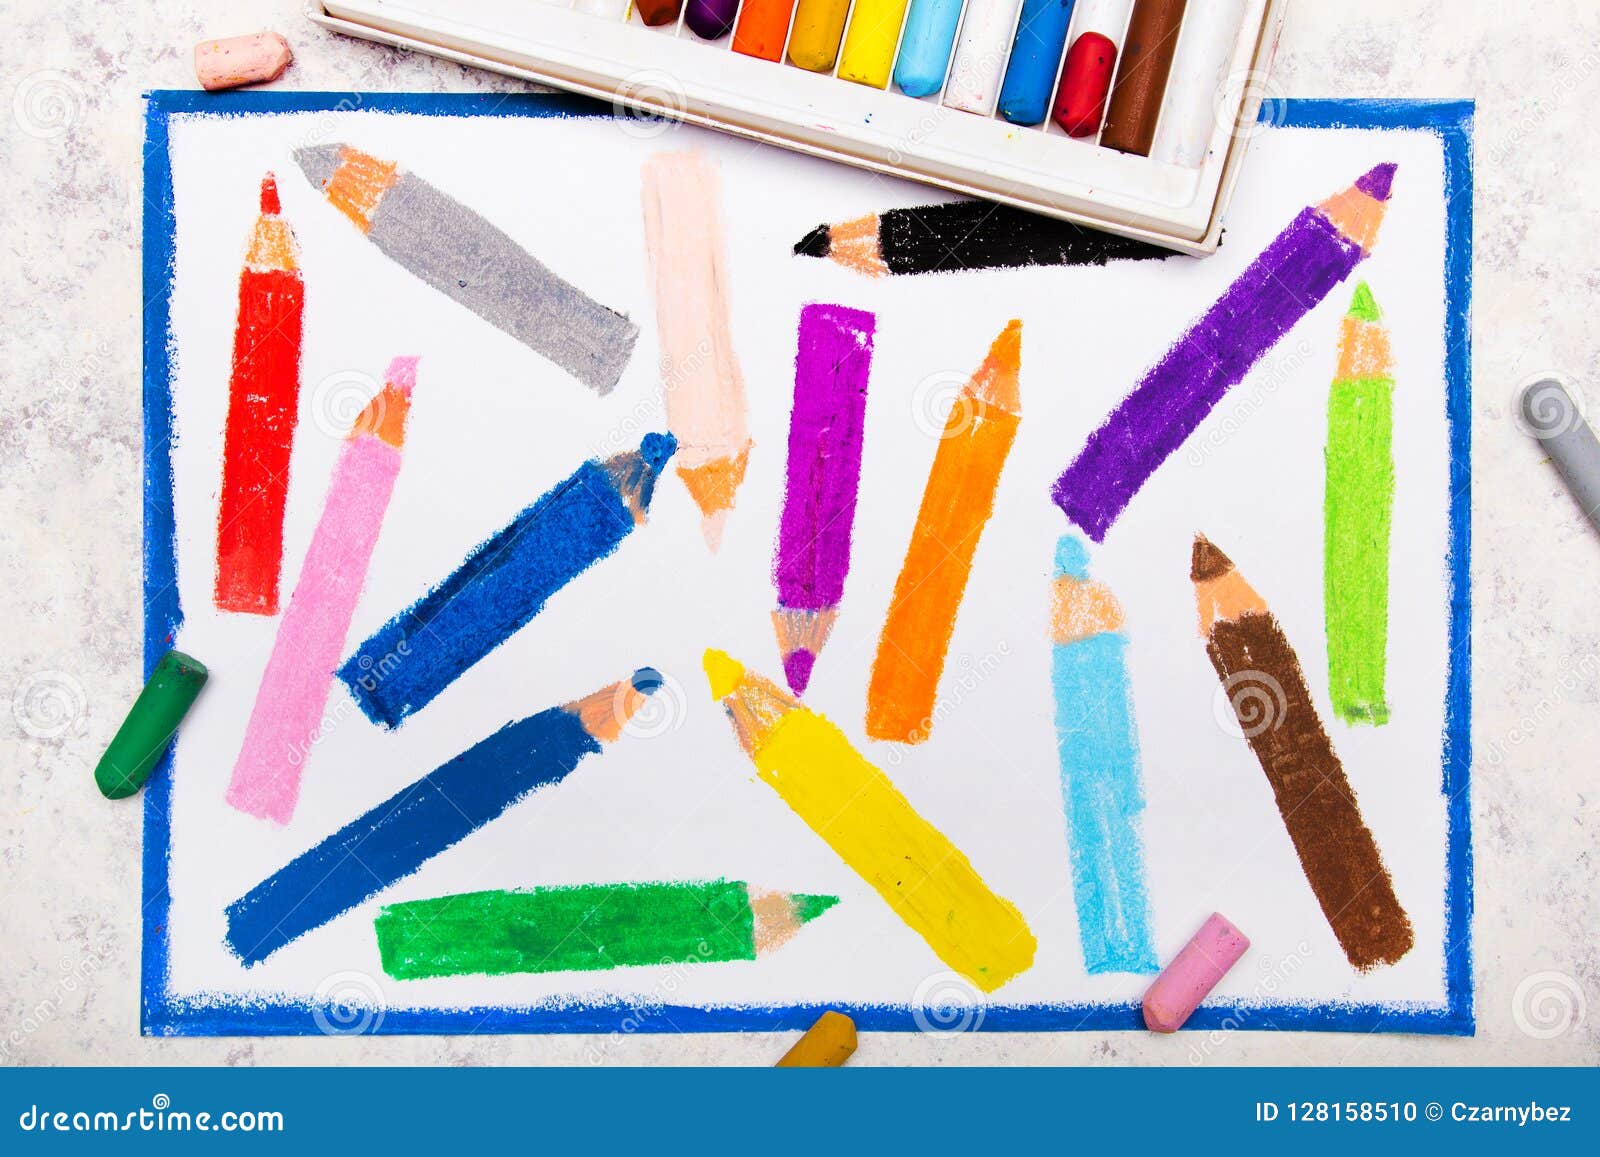 Colorful Hand Drawing: Colorful Crayons Stock Illustration ...